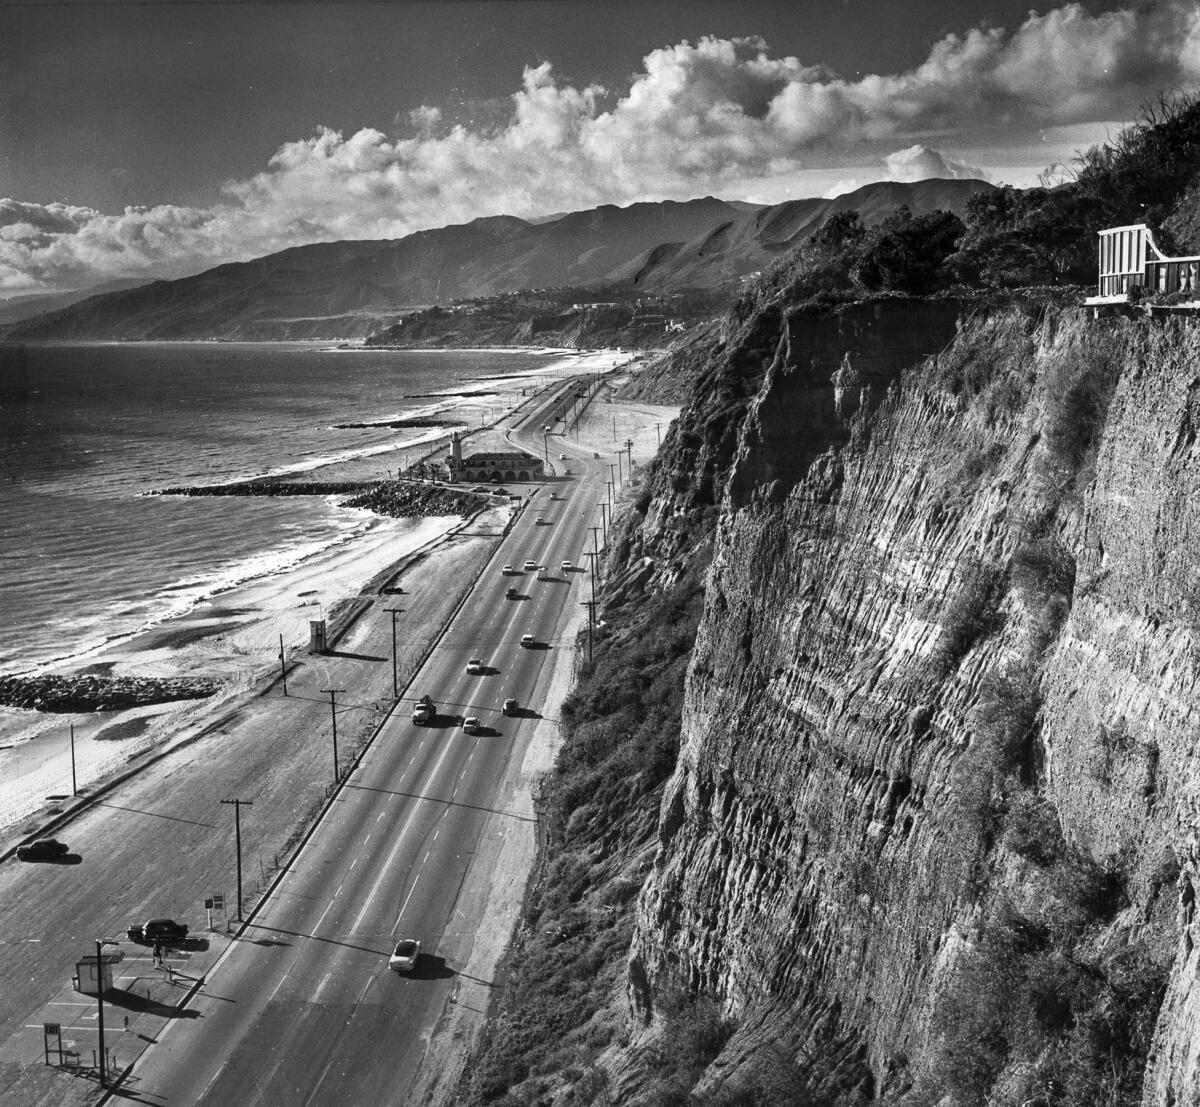 Feb. 19, 1960: A view of Pacific Coast Highway at Will Rogers State Beach in Pacific Palisades. The building at the center of the photo is a lifeguard tower and offices for the state beach.